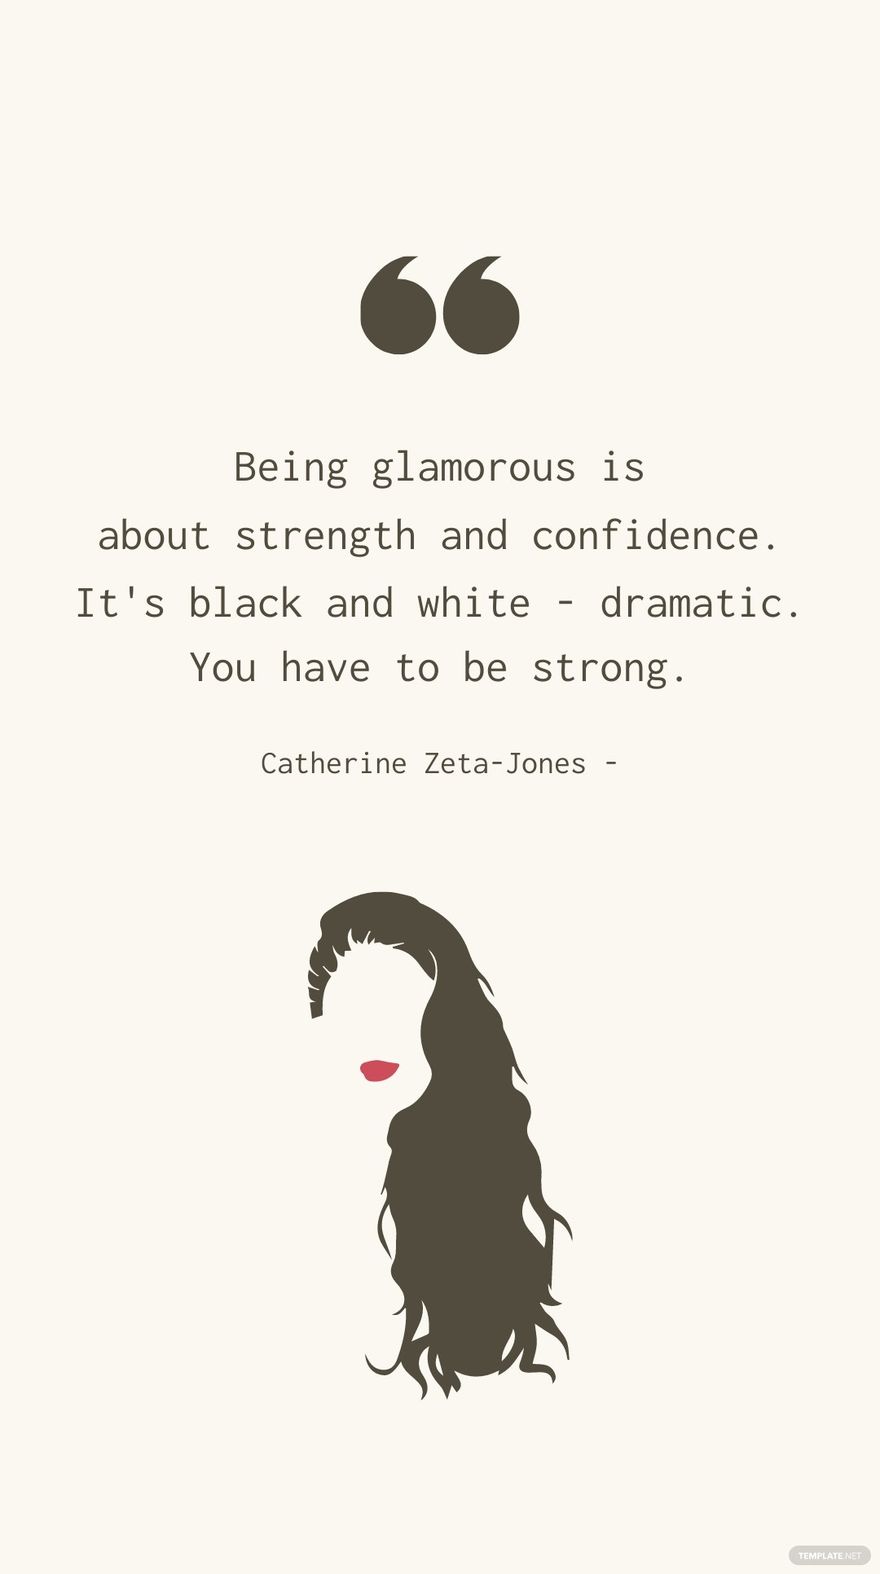 Catherine Zeta-Jones - Being glamorous is about strength and confidence. It's black and white - dramatic. You have to be strong.